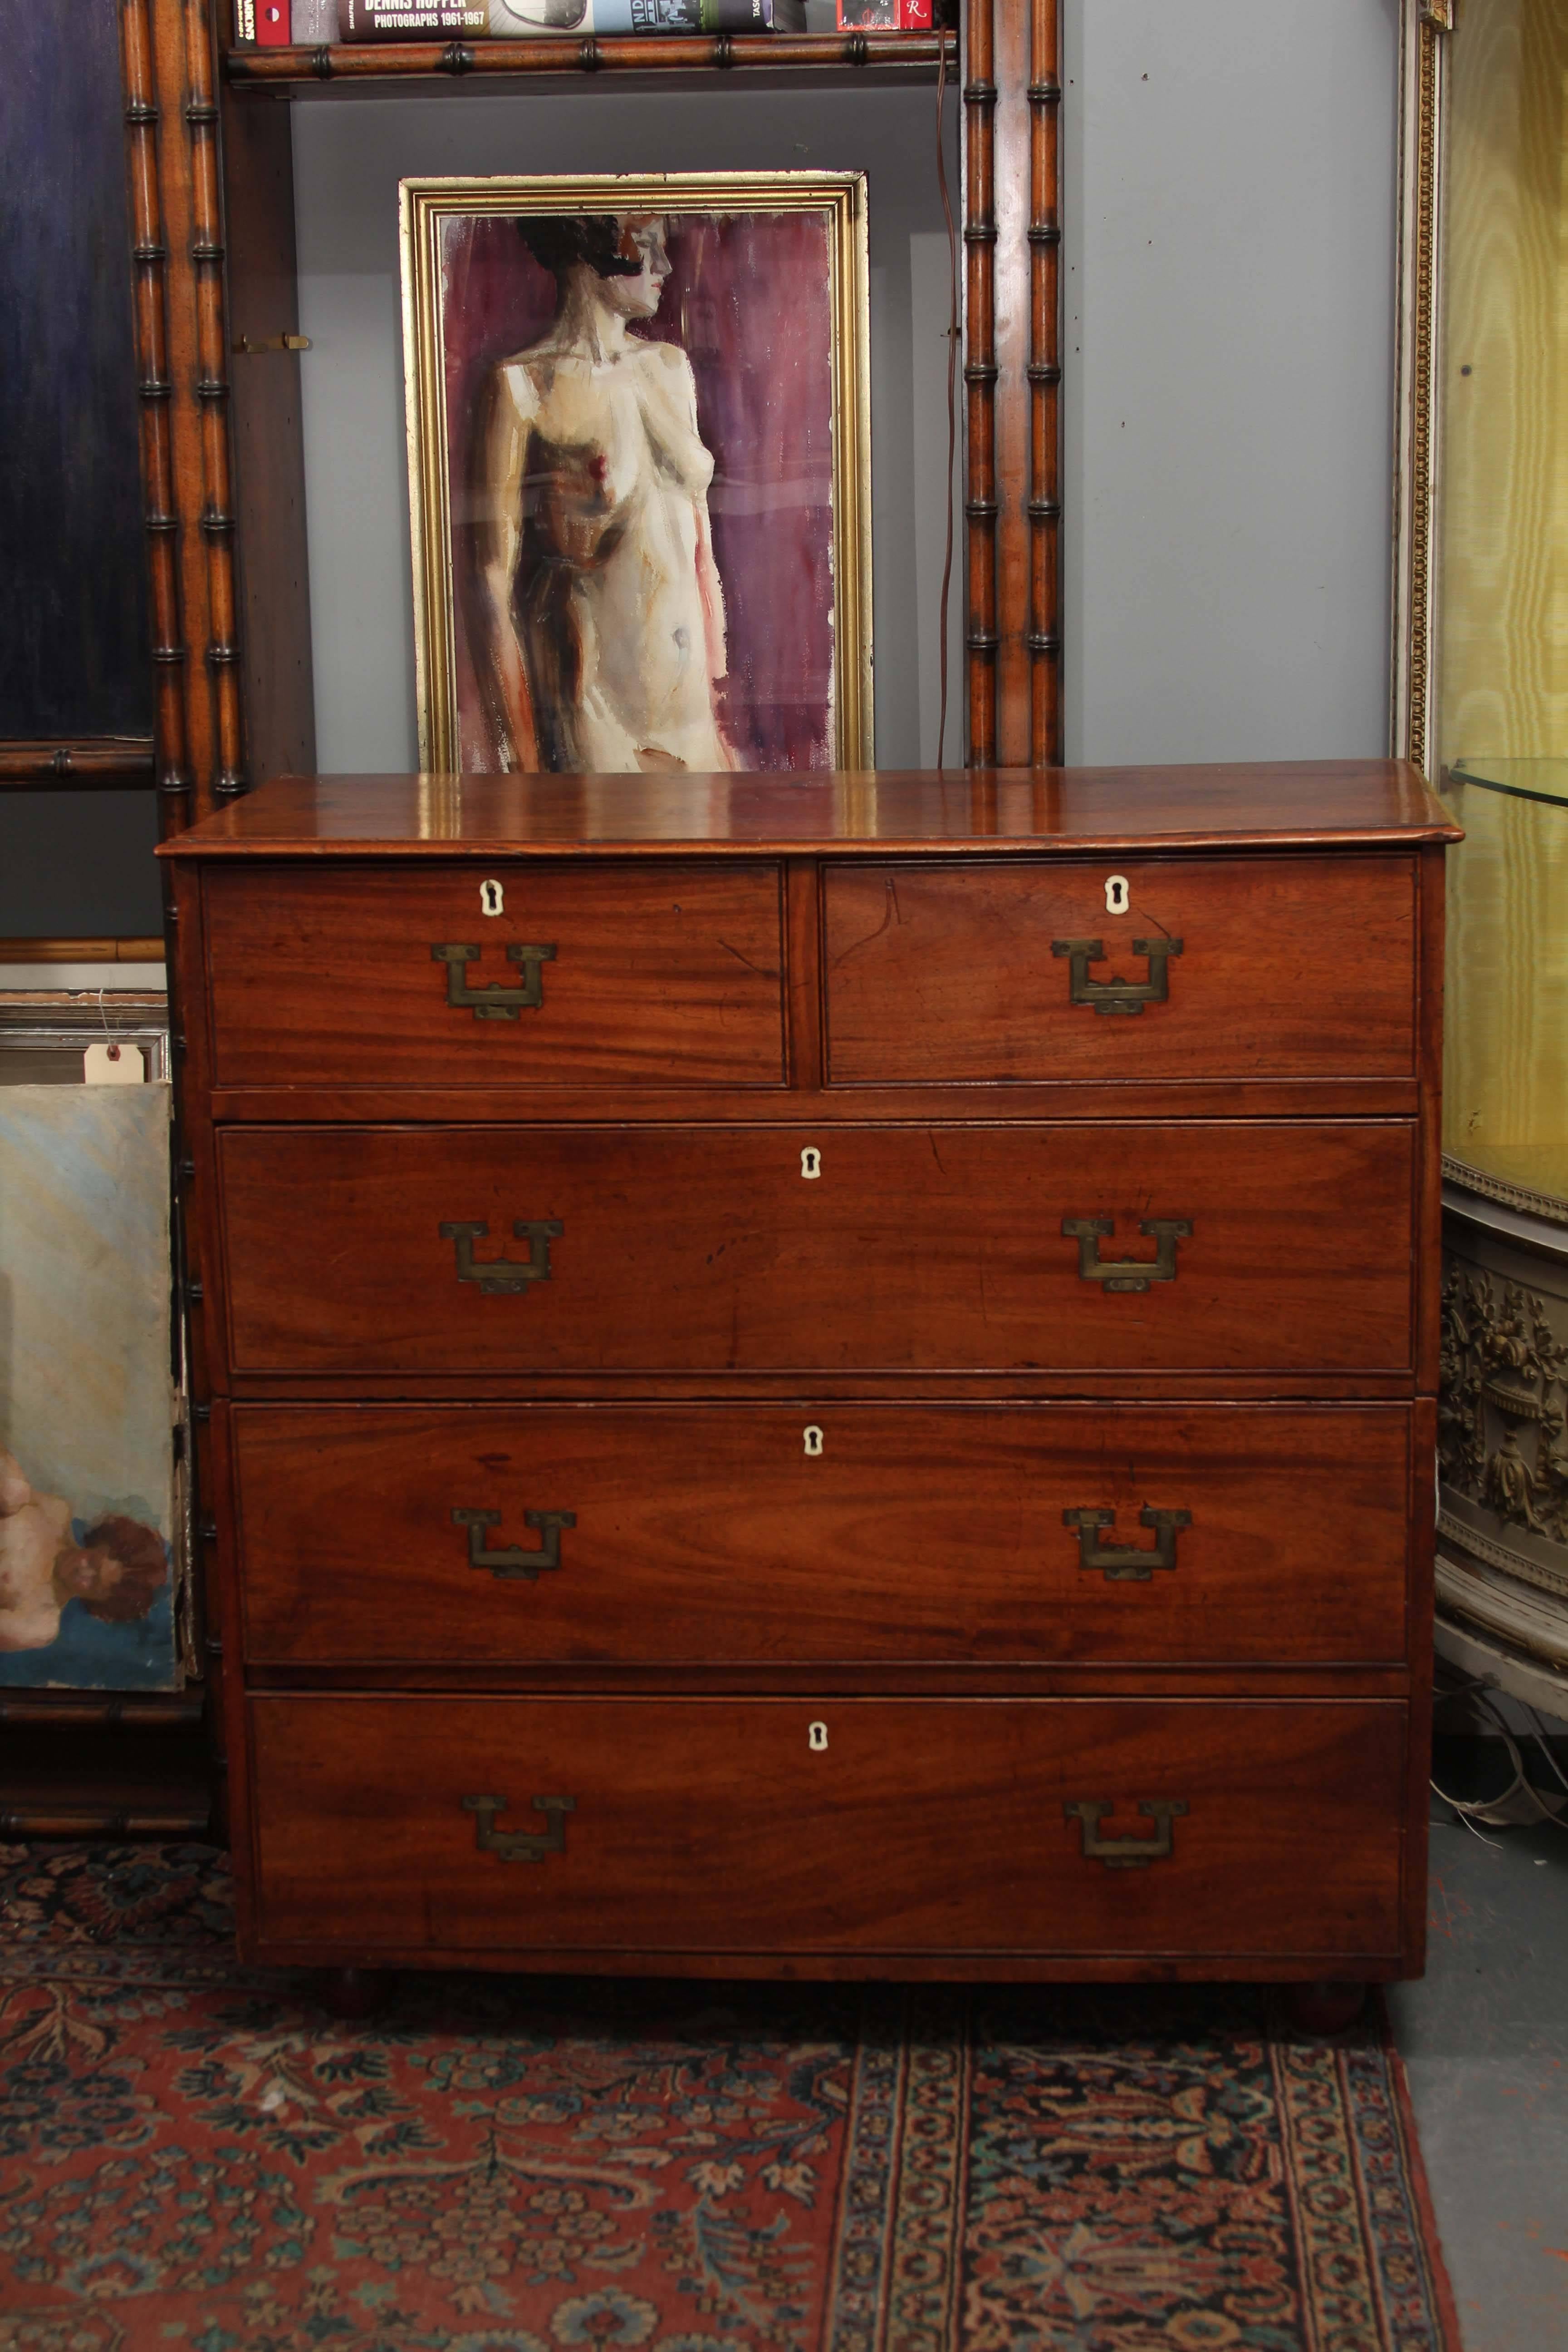 Handsome 19th century Campaign chest with five drawers.